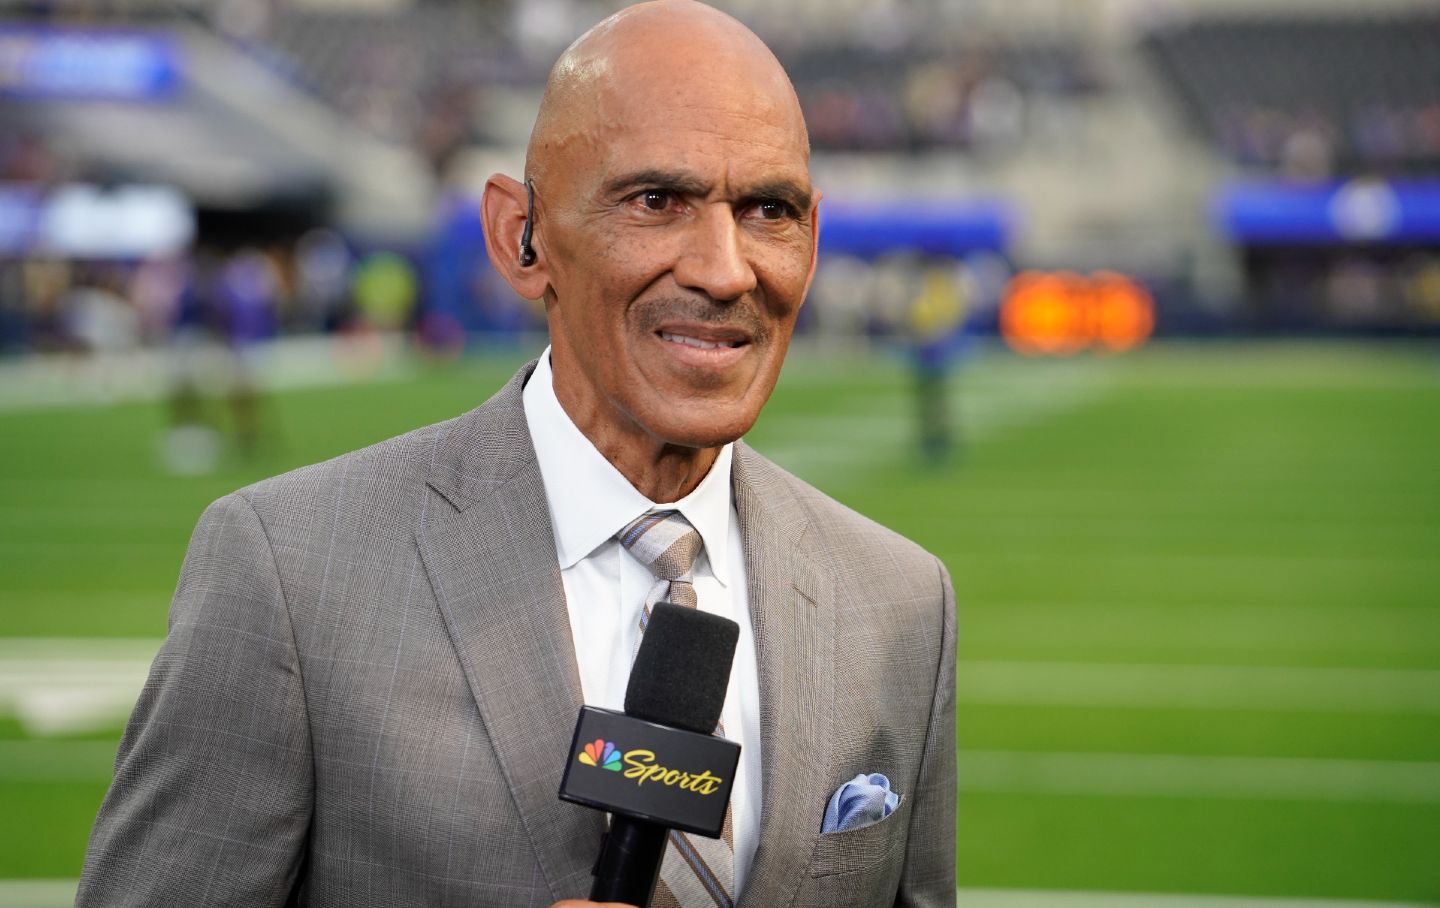 Tony Dungy Is a Right-Wing Zealot and the NFL and NBC Don’t Care